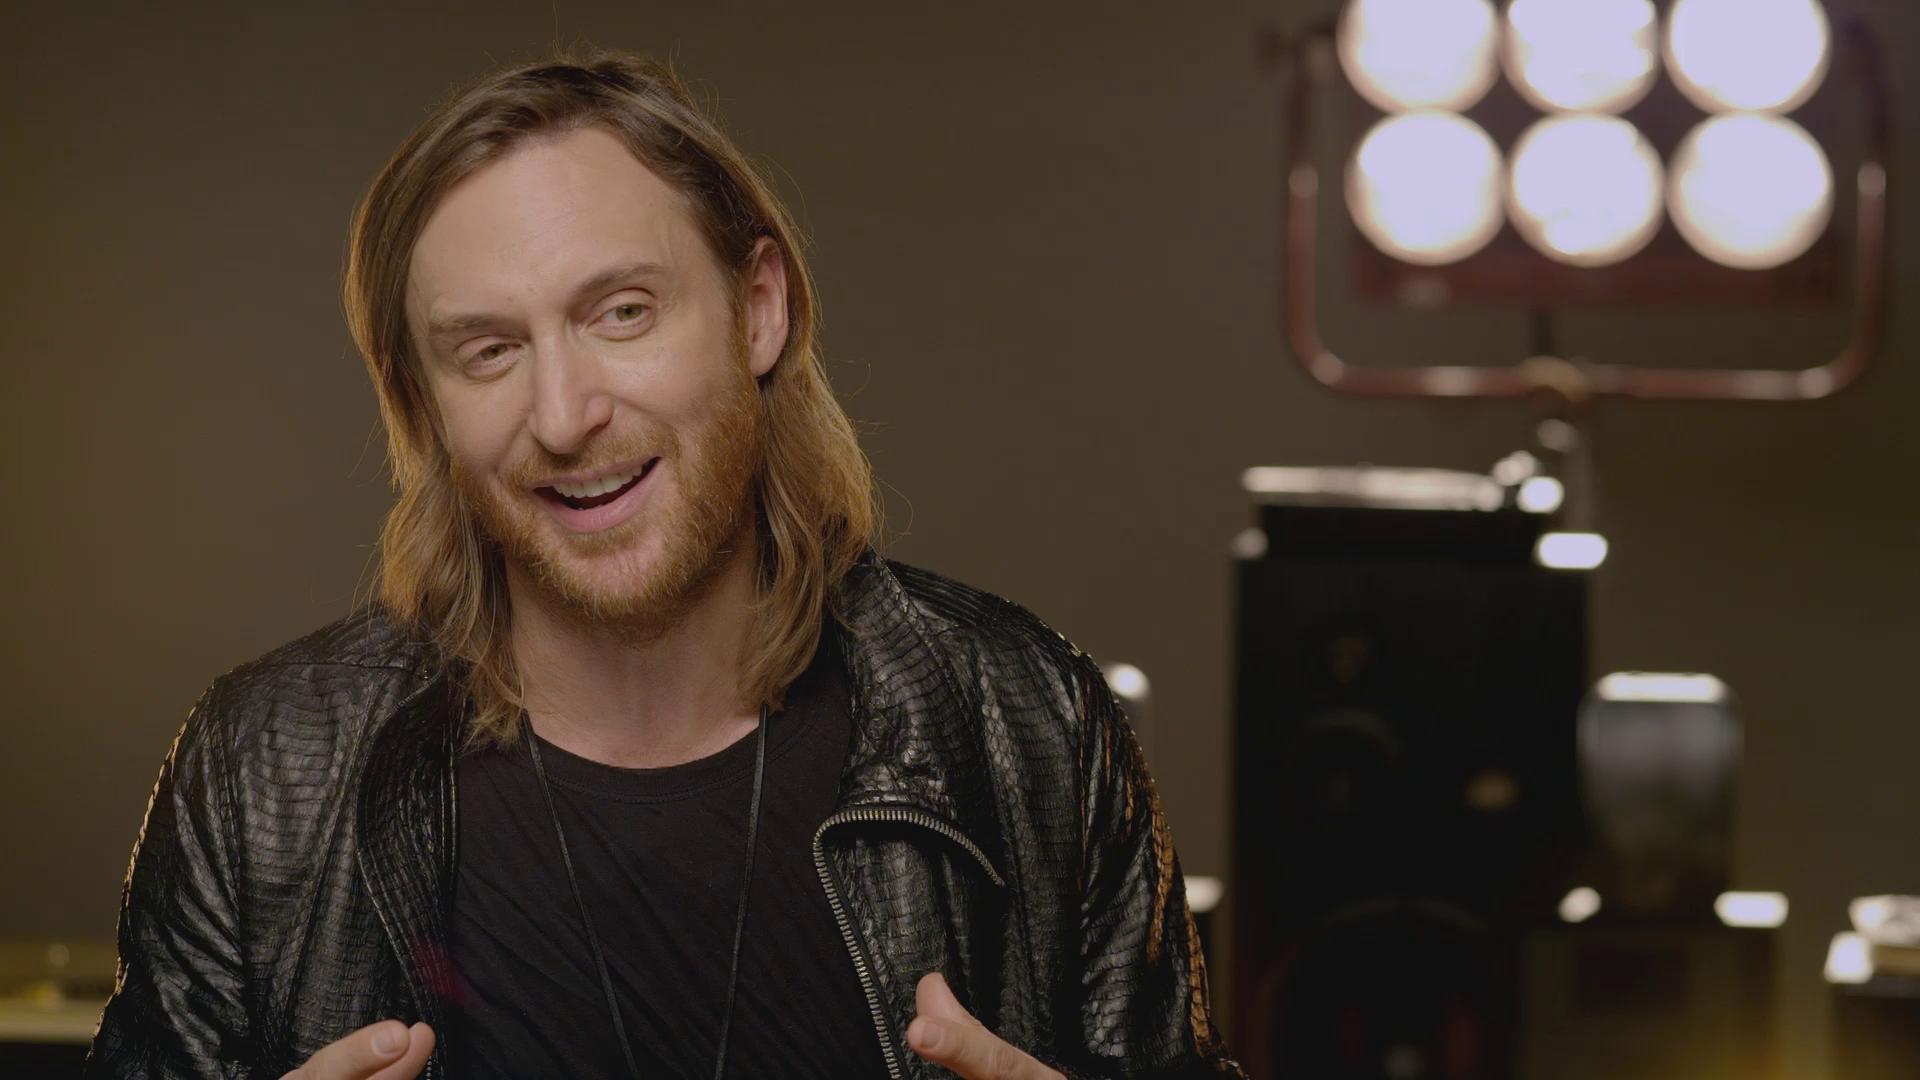 David Guetta Plans to DJ in… Space